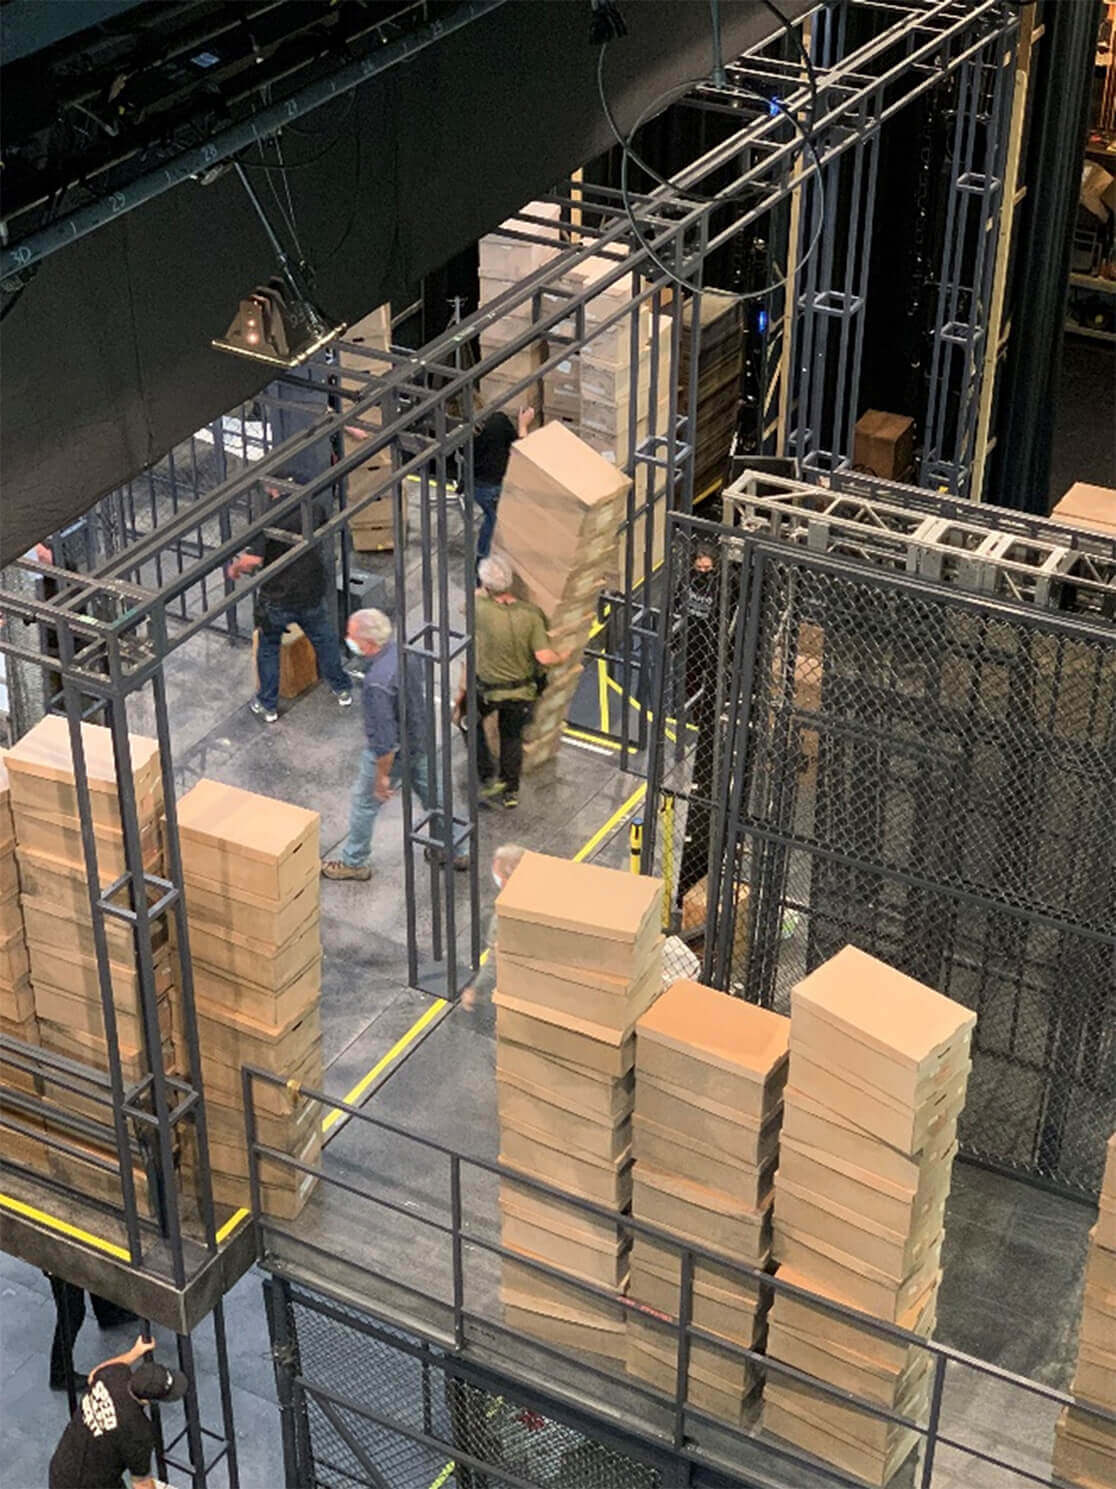 Moving the stacks of boxes into place for Act II.